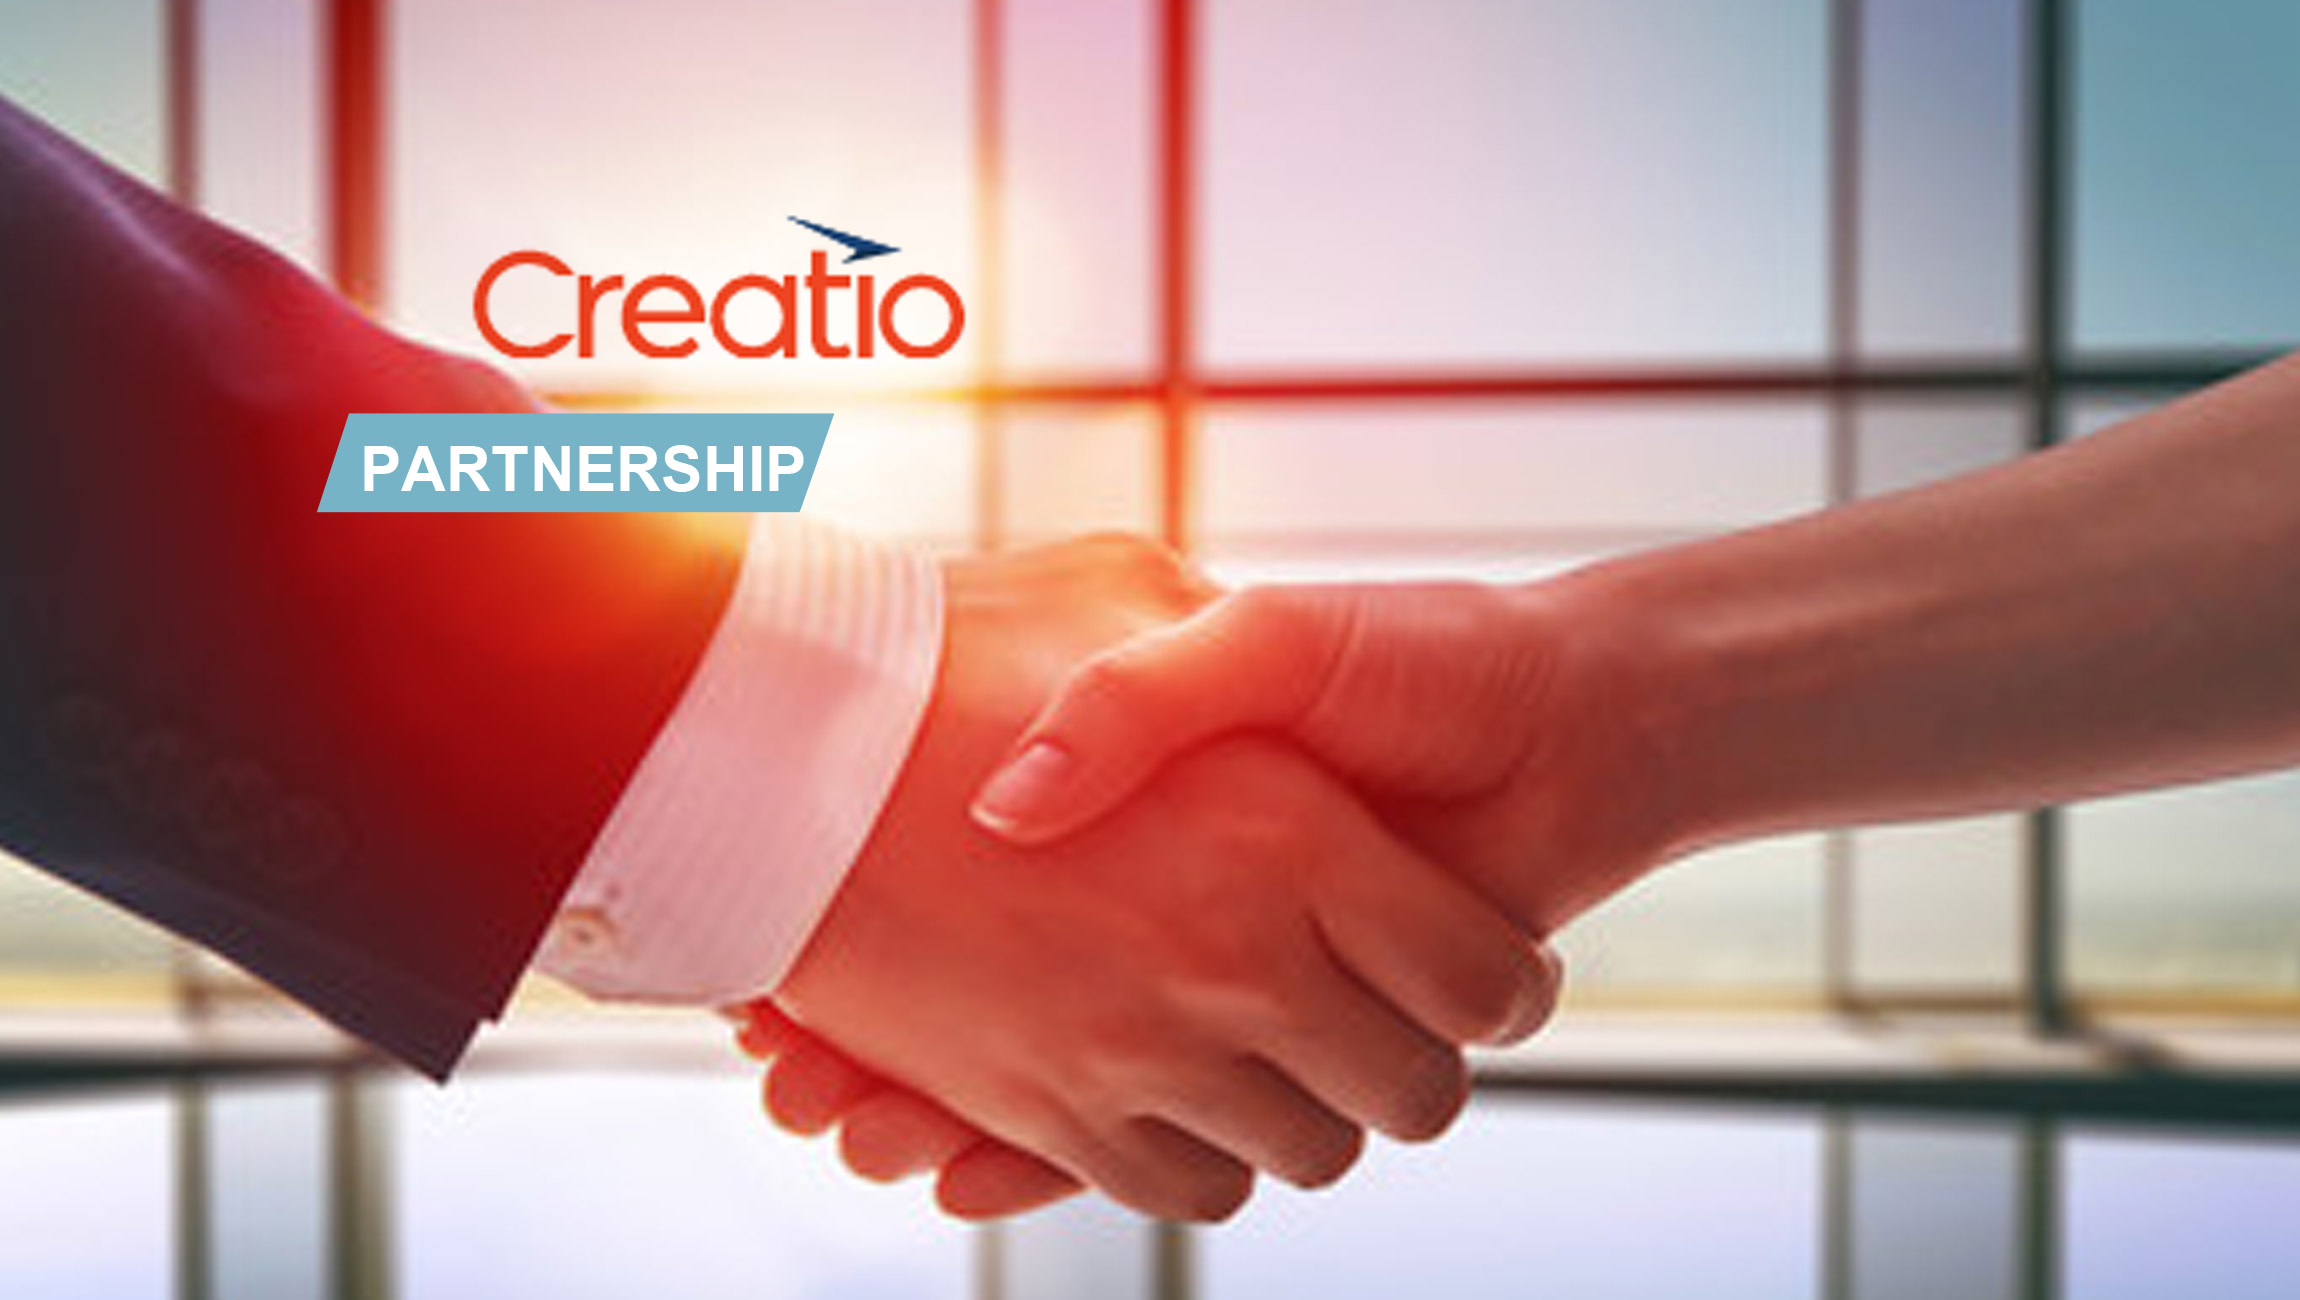 Creatio Further Expands in the Middle East, Partners with Nuummite Consulting